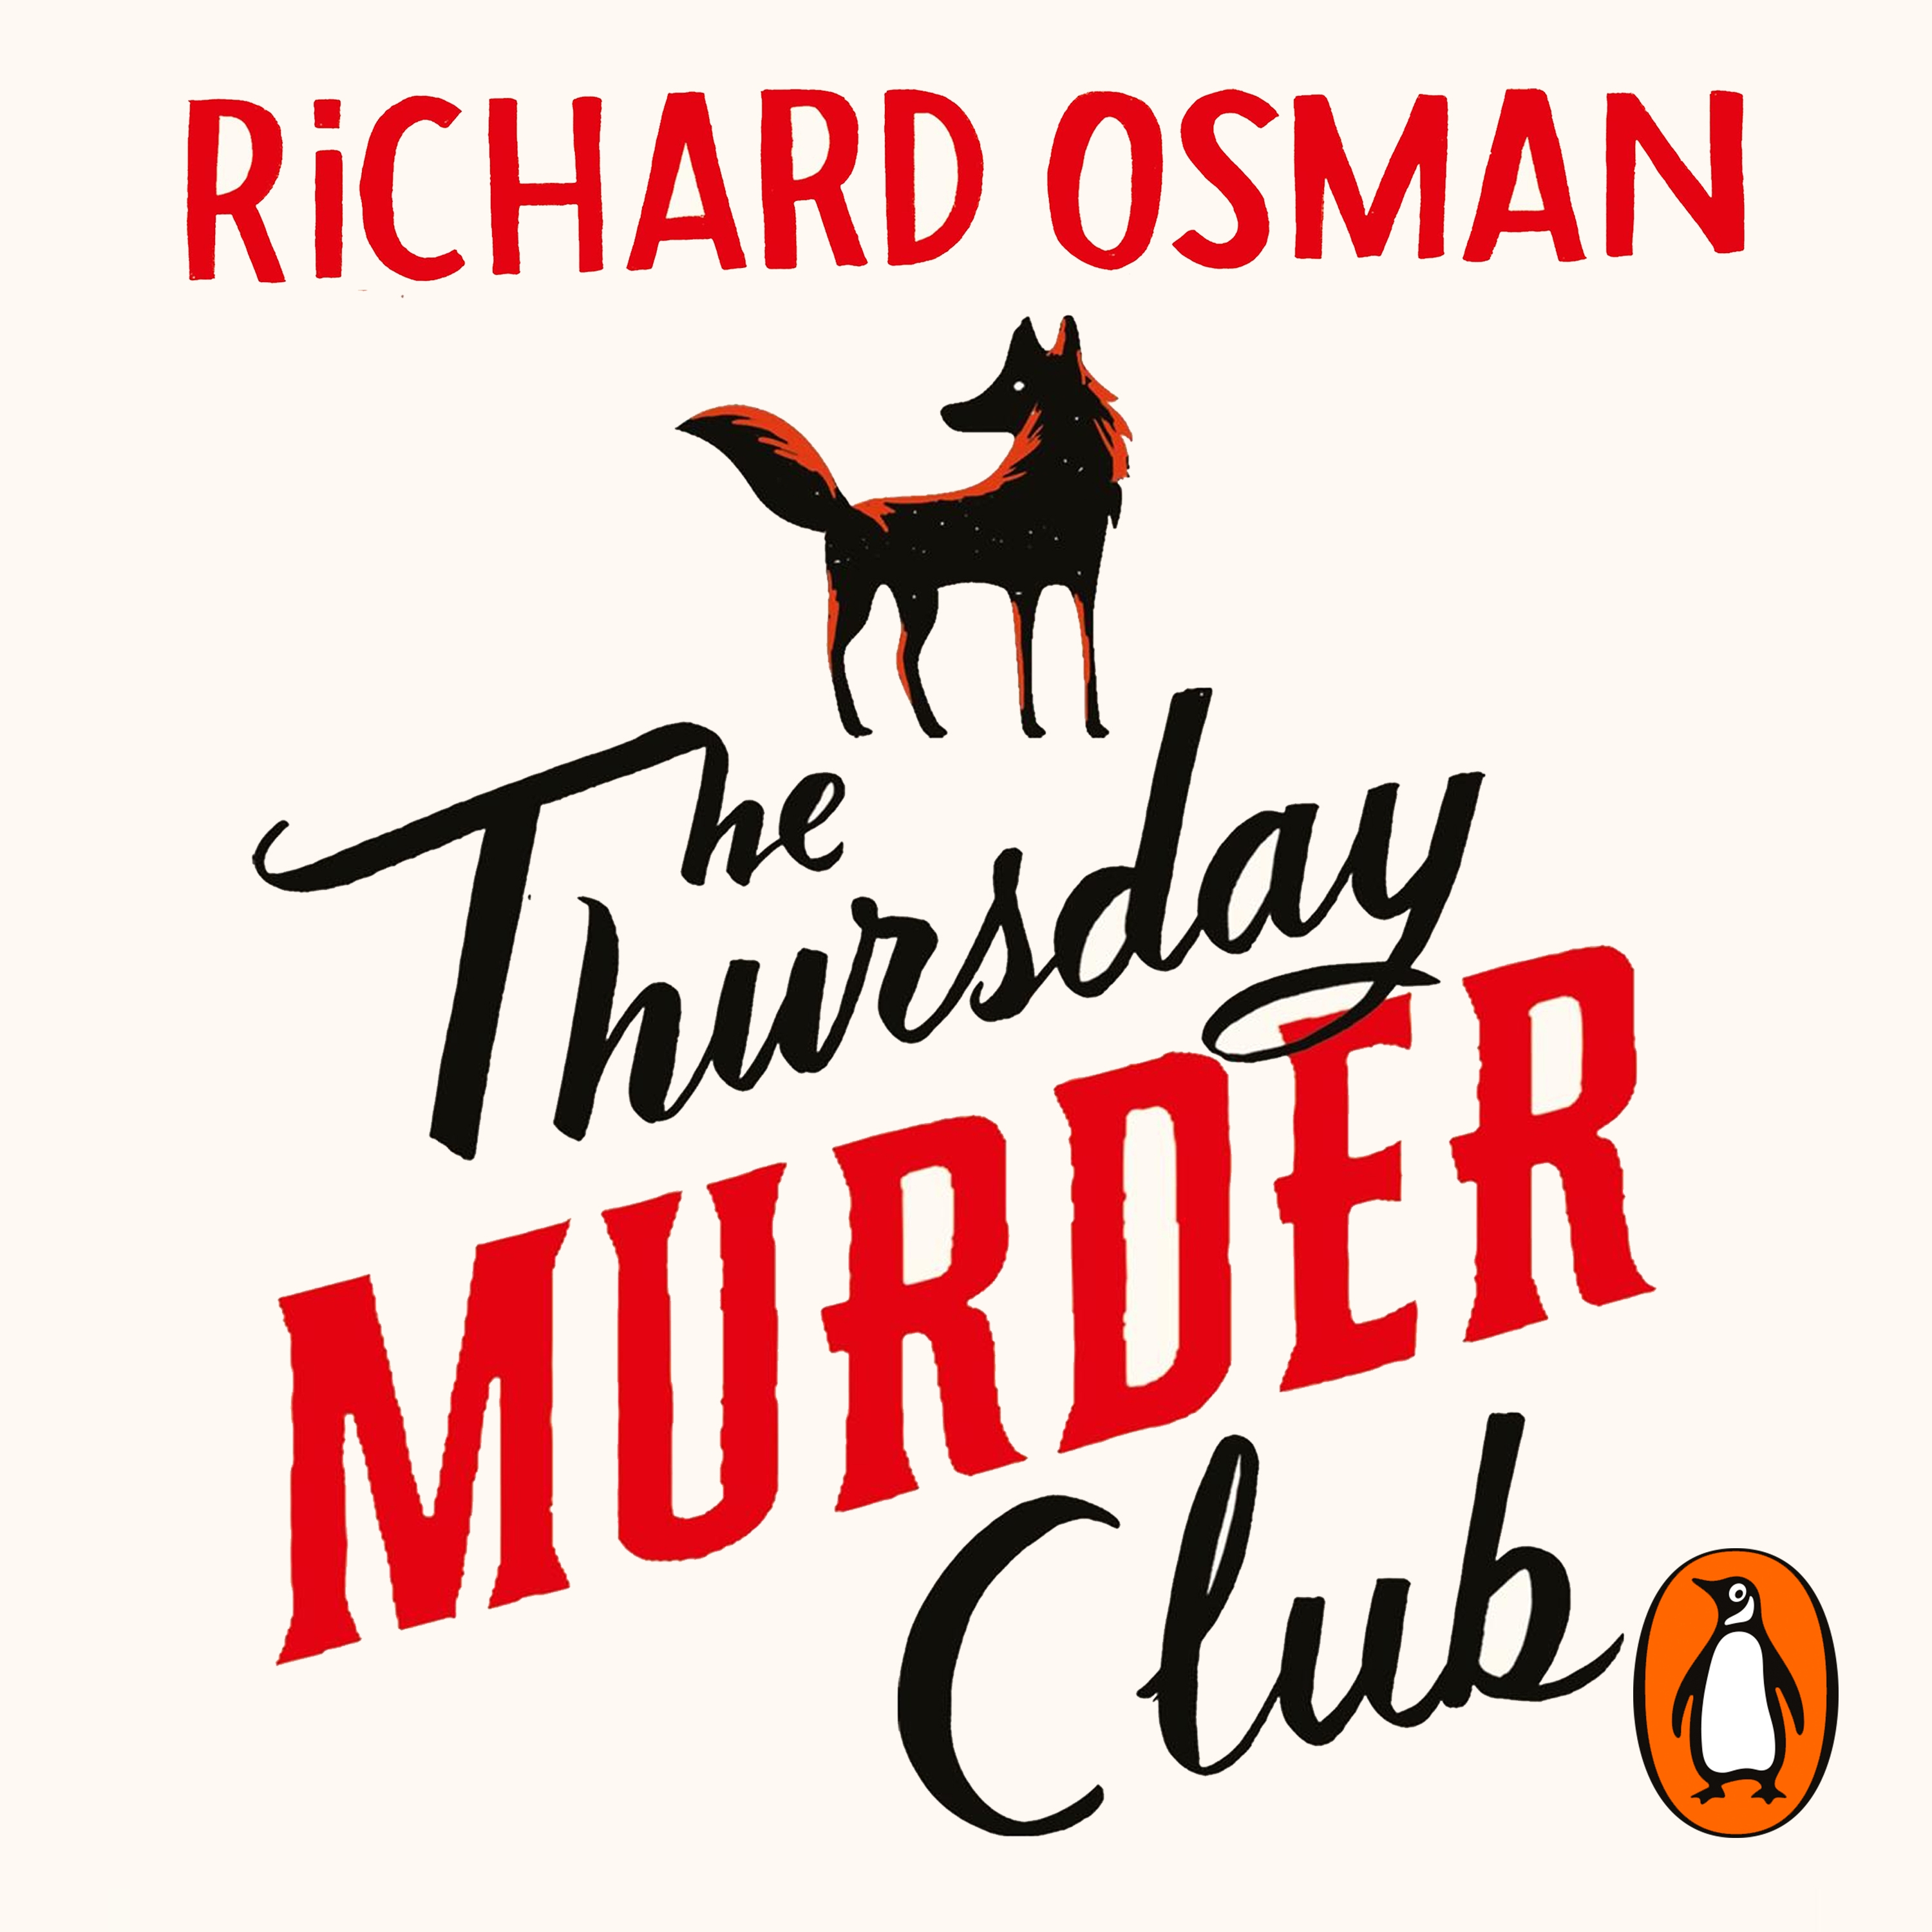 Audiobook cover for The Thursday Murder Club: cream background with Richard Osman's name at the top, an illustrated fox below that, and the title in handwritten black and red font below.